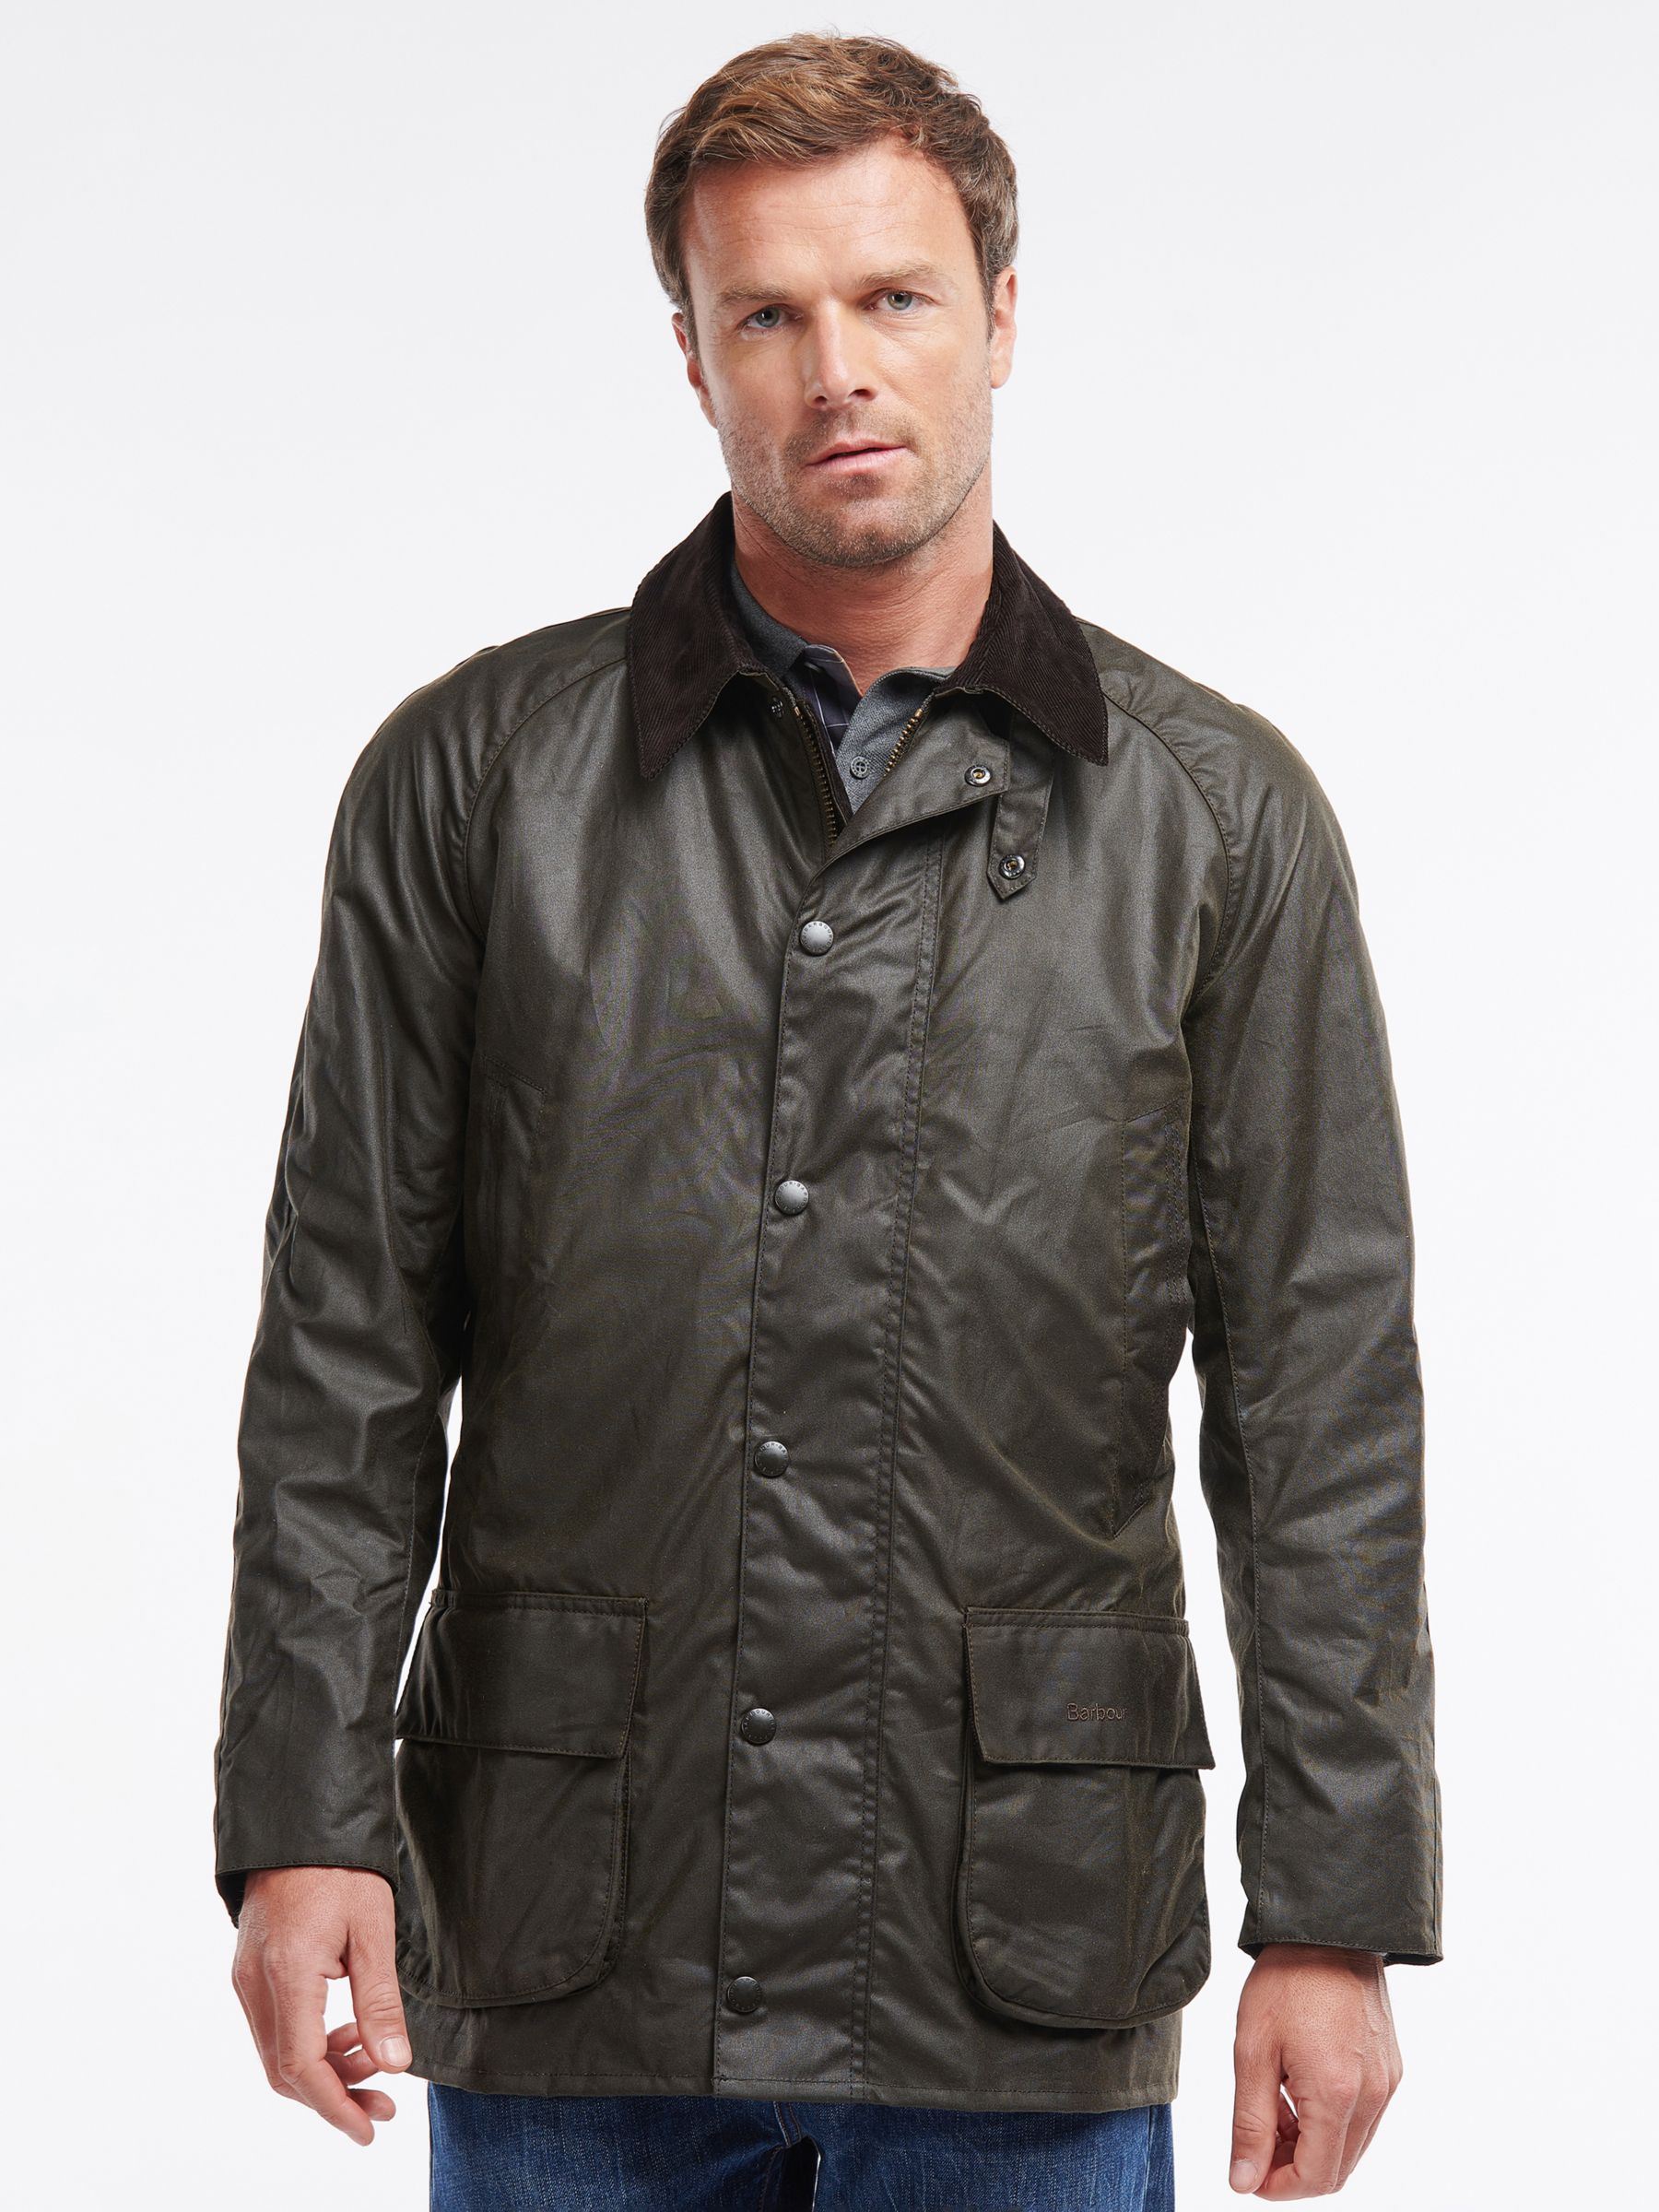 Barbour Bristol Waxed Cotton Jacket, Olive at John Lewis & Partners